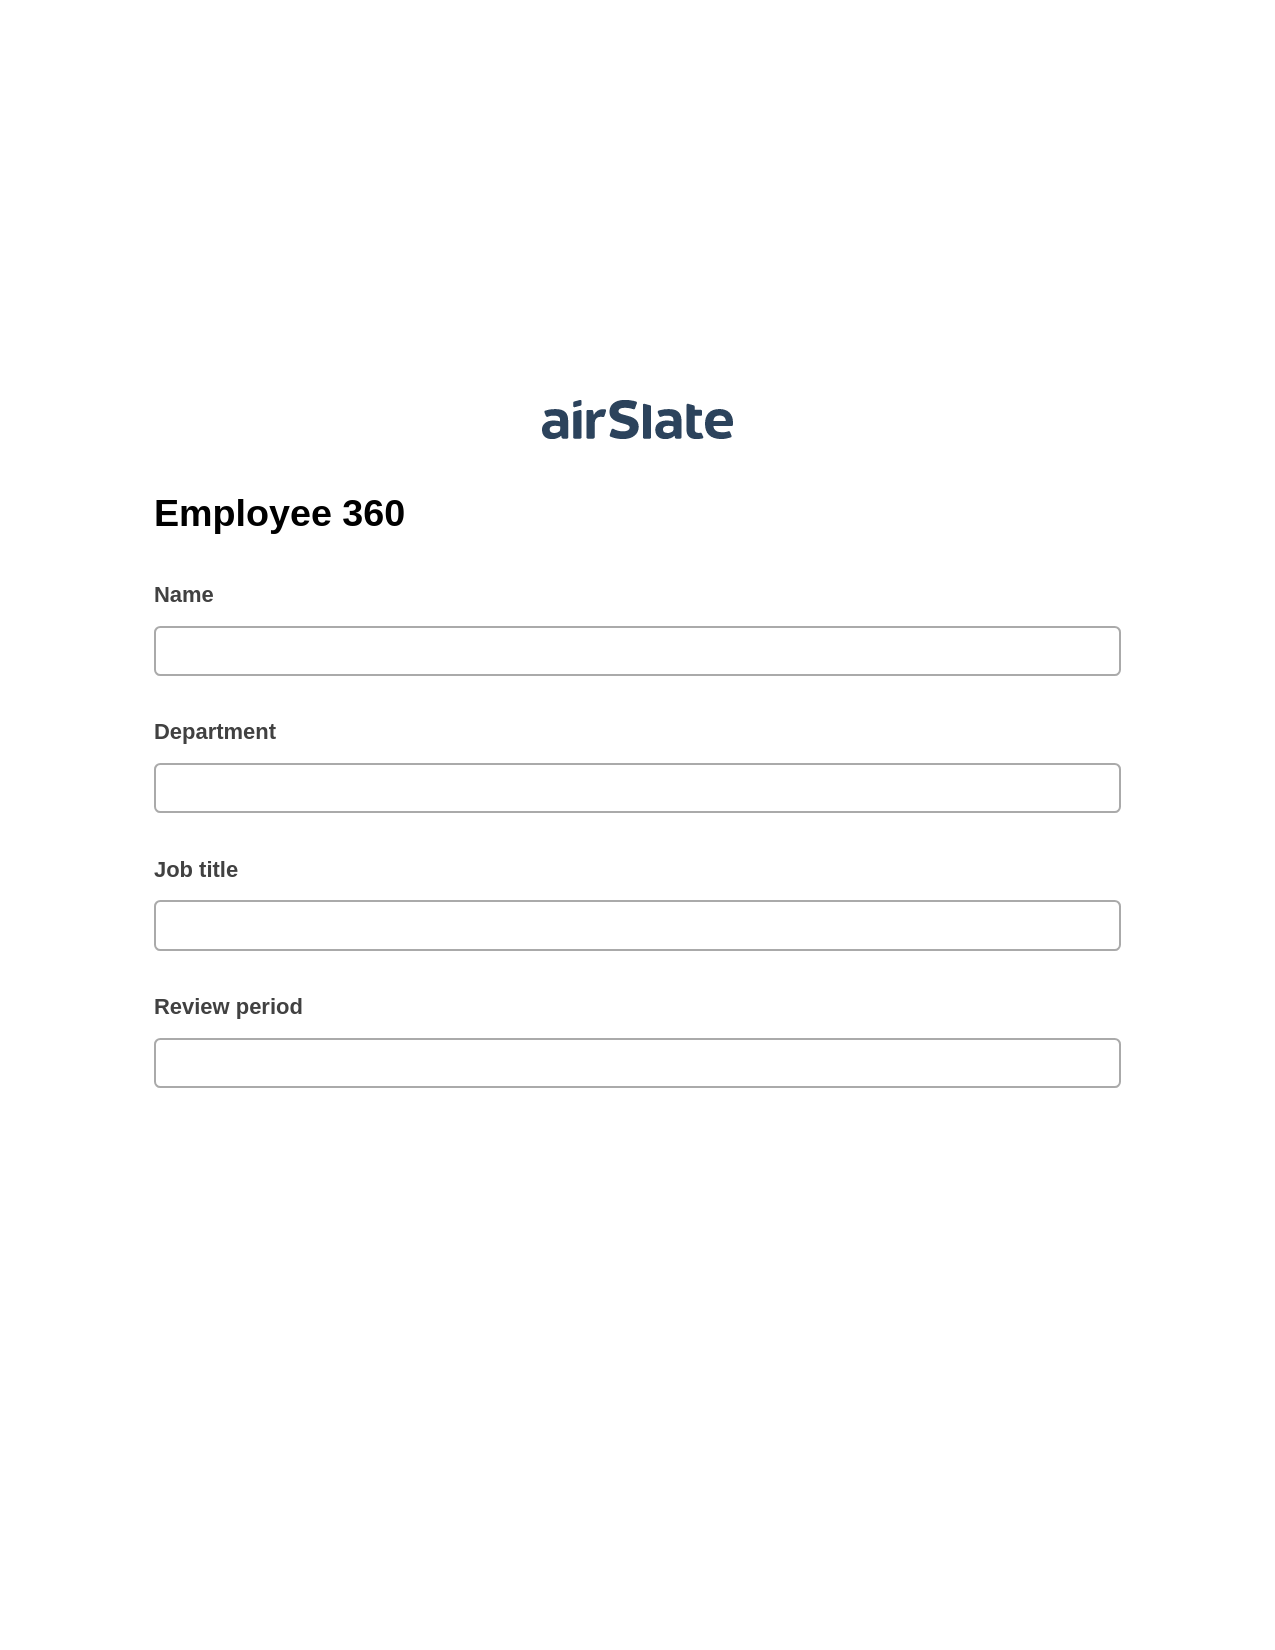 Multirole Employee 360 Pre-fill from Office 365 Excel Bot, Open under a Role Bot, Export to WebMerge Bot